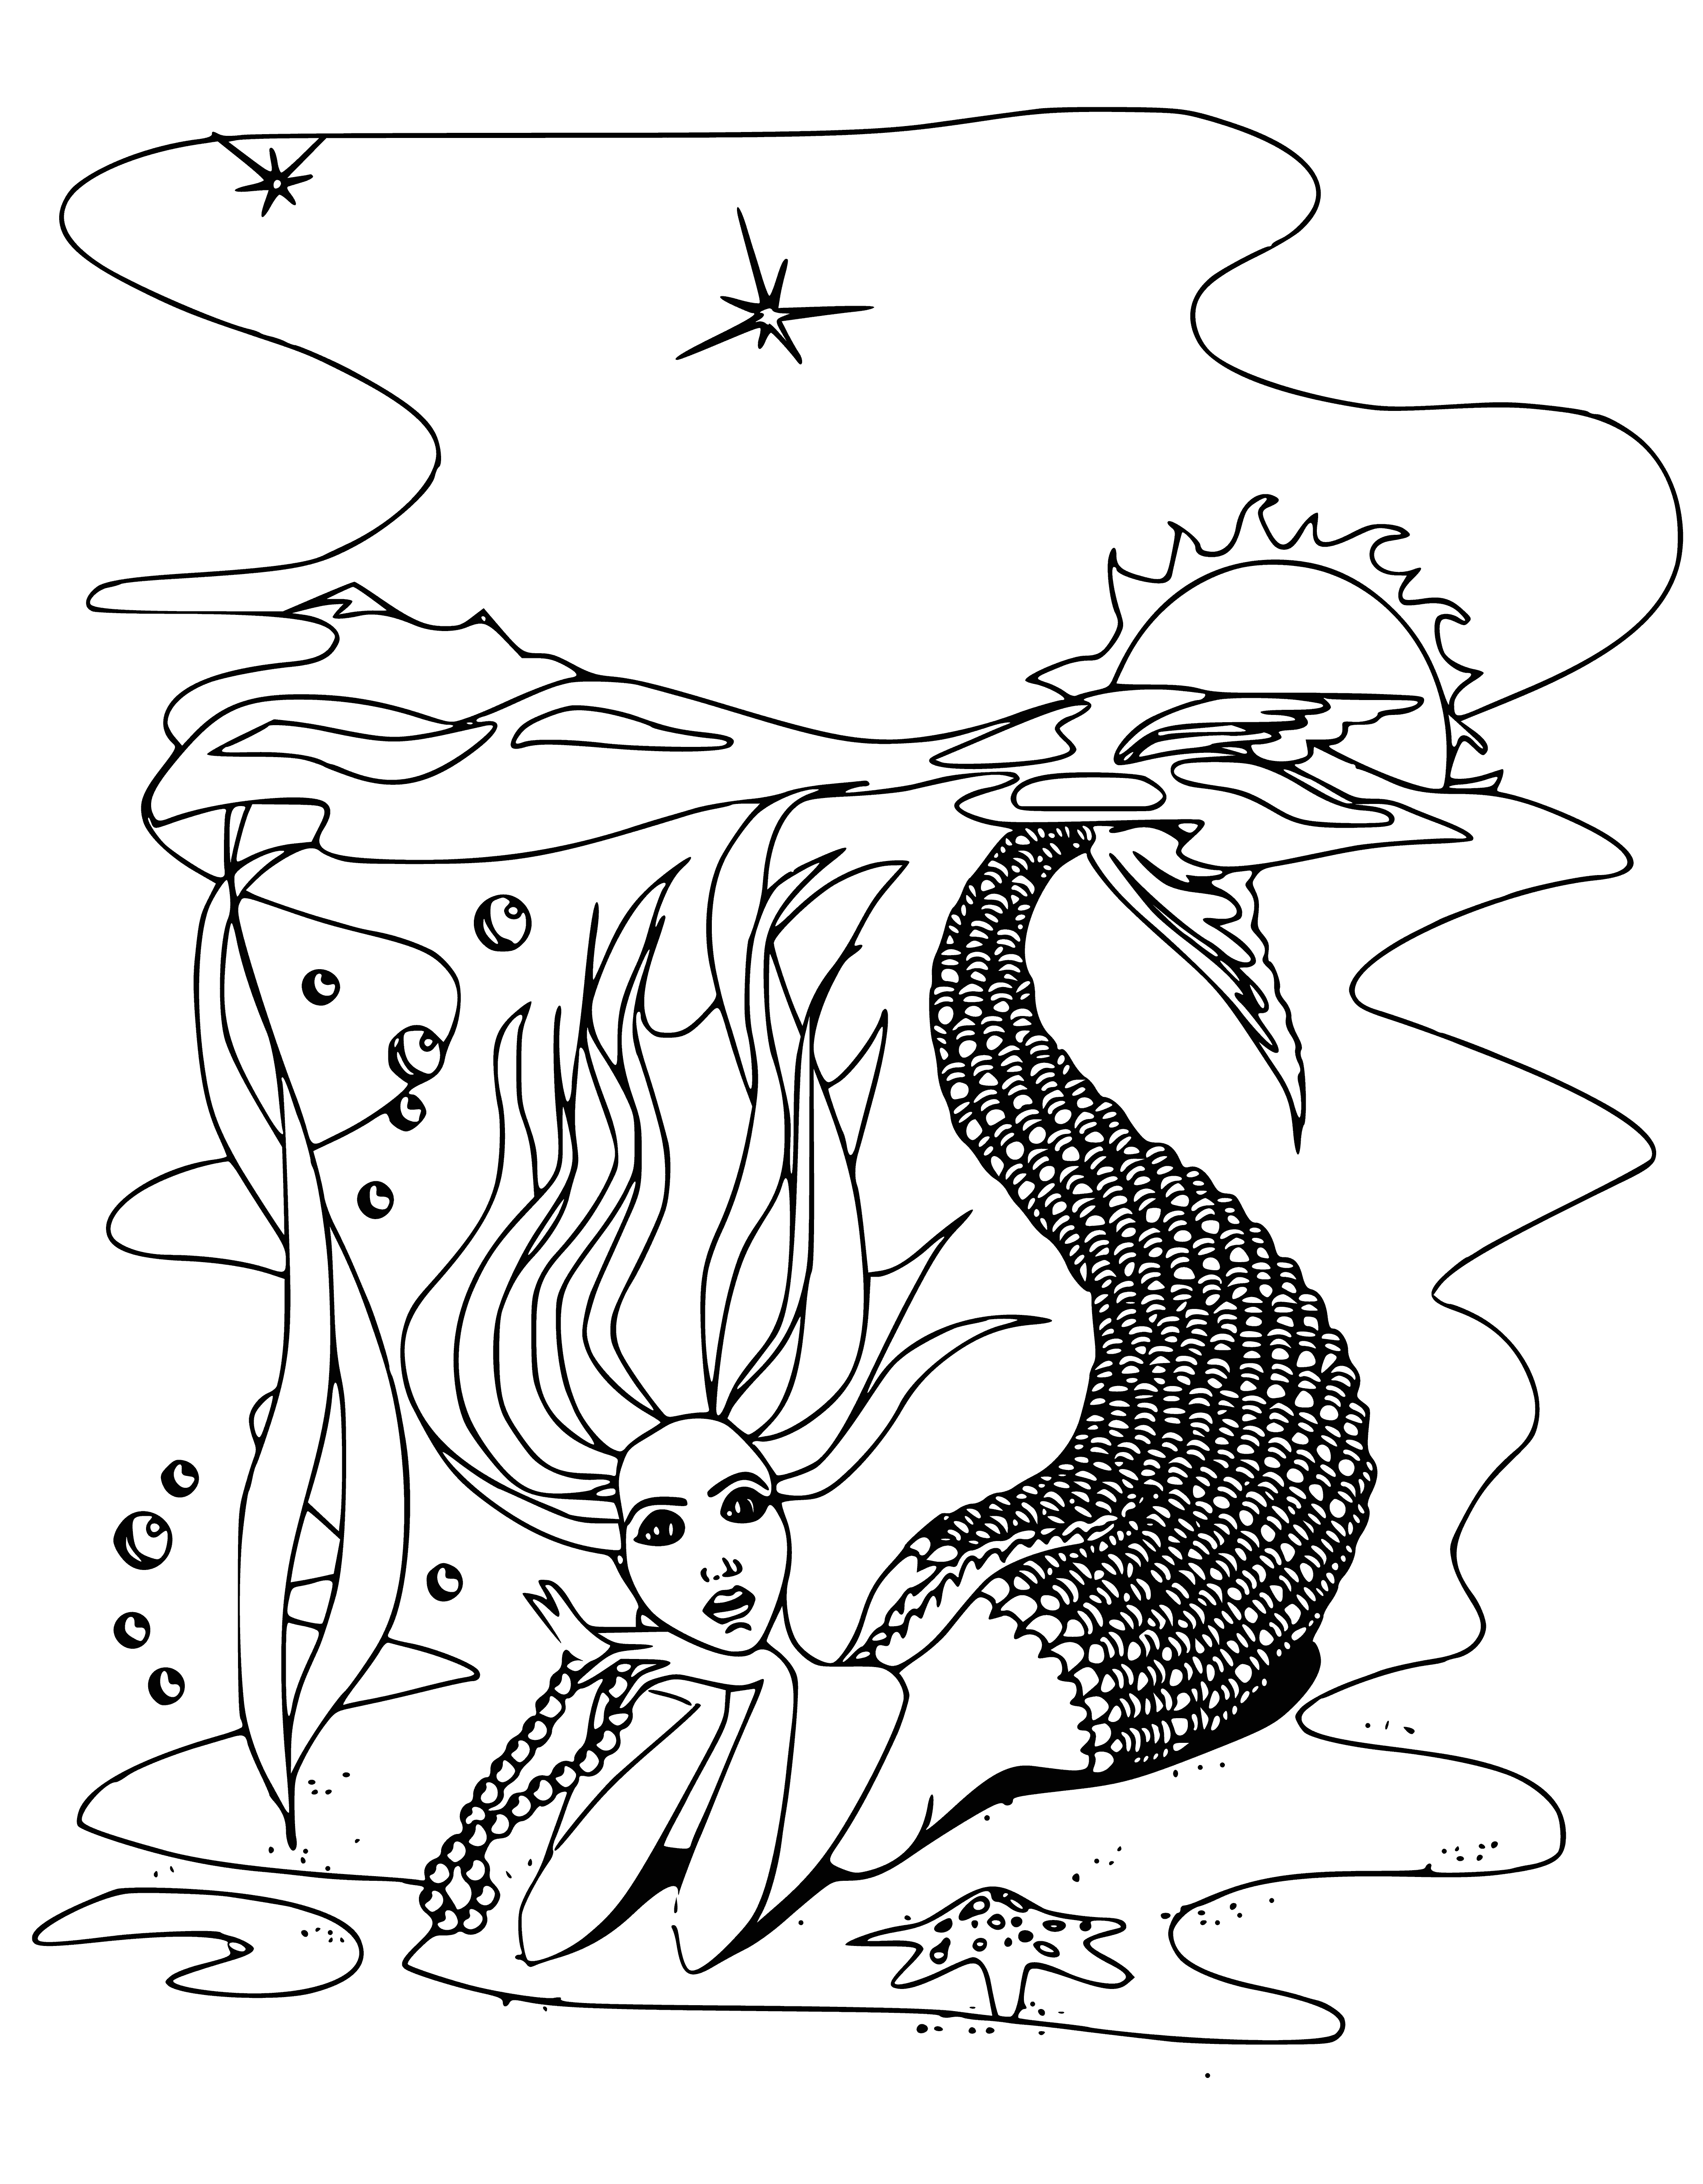 coloring page: Mermaid swims in water, long hair, crown, trident in hand.